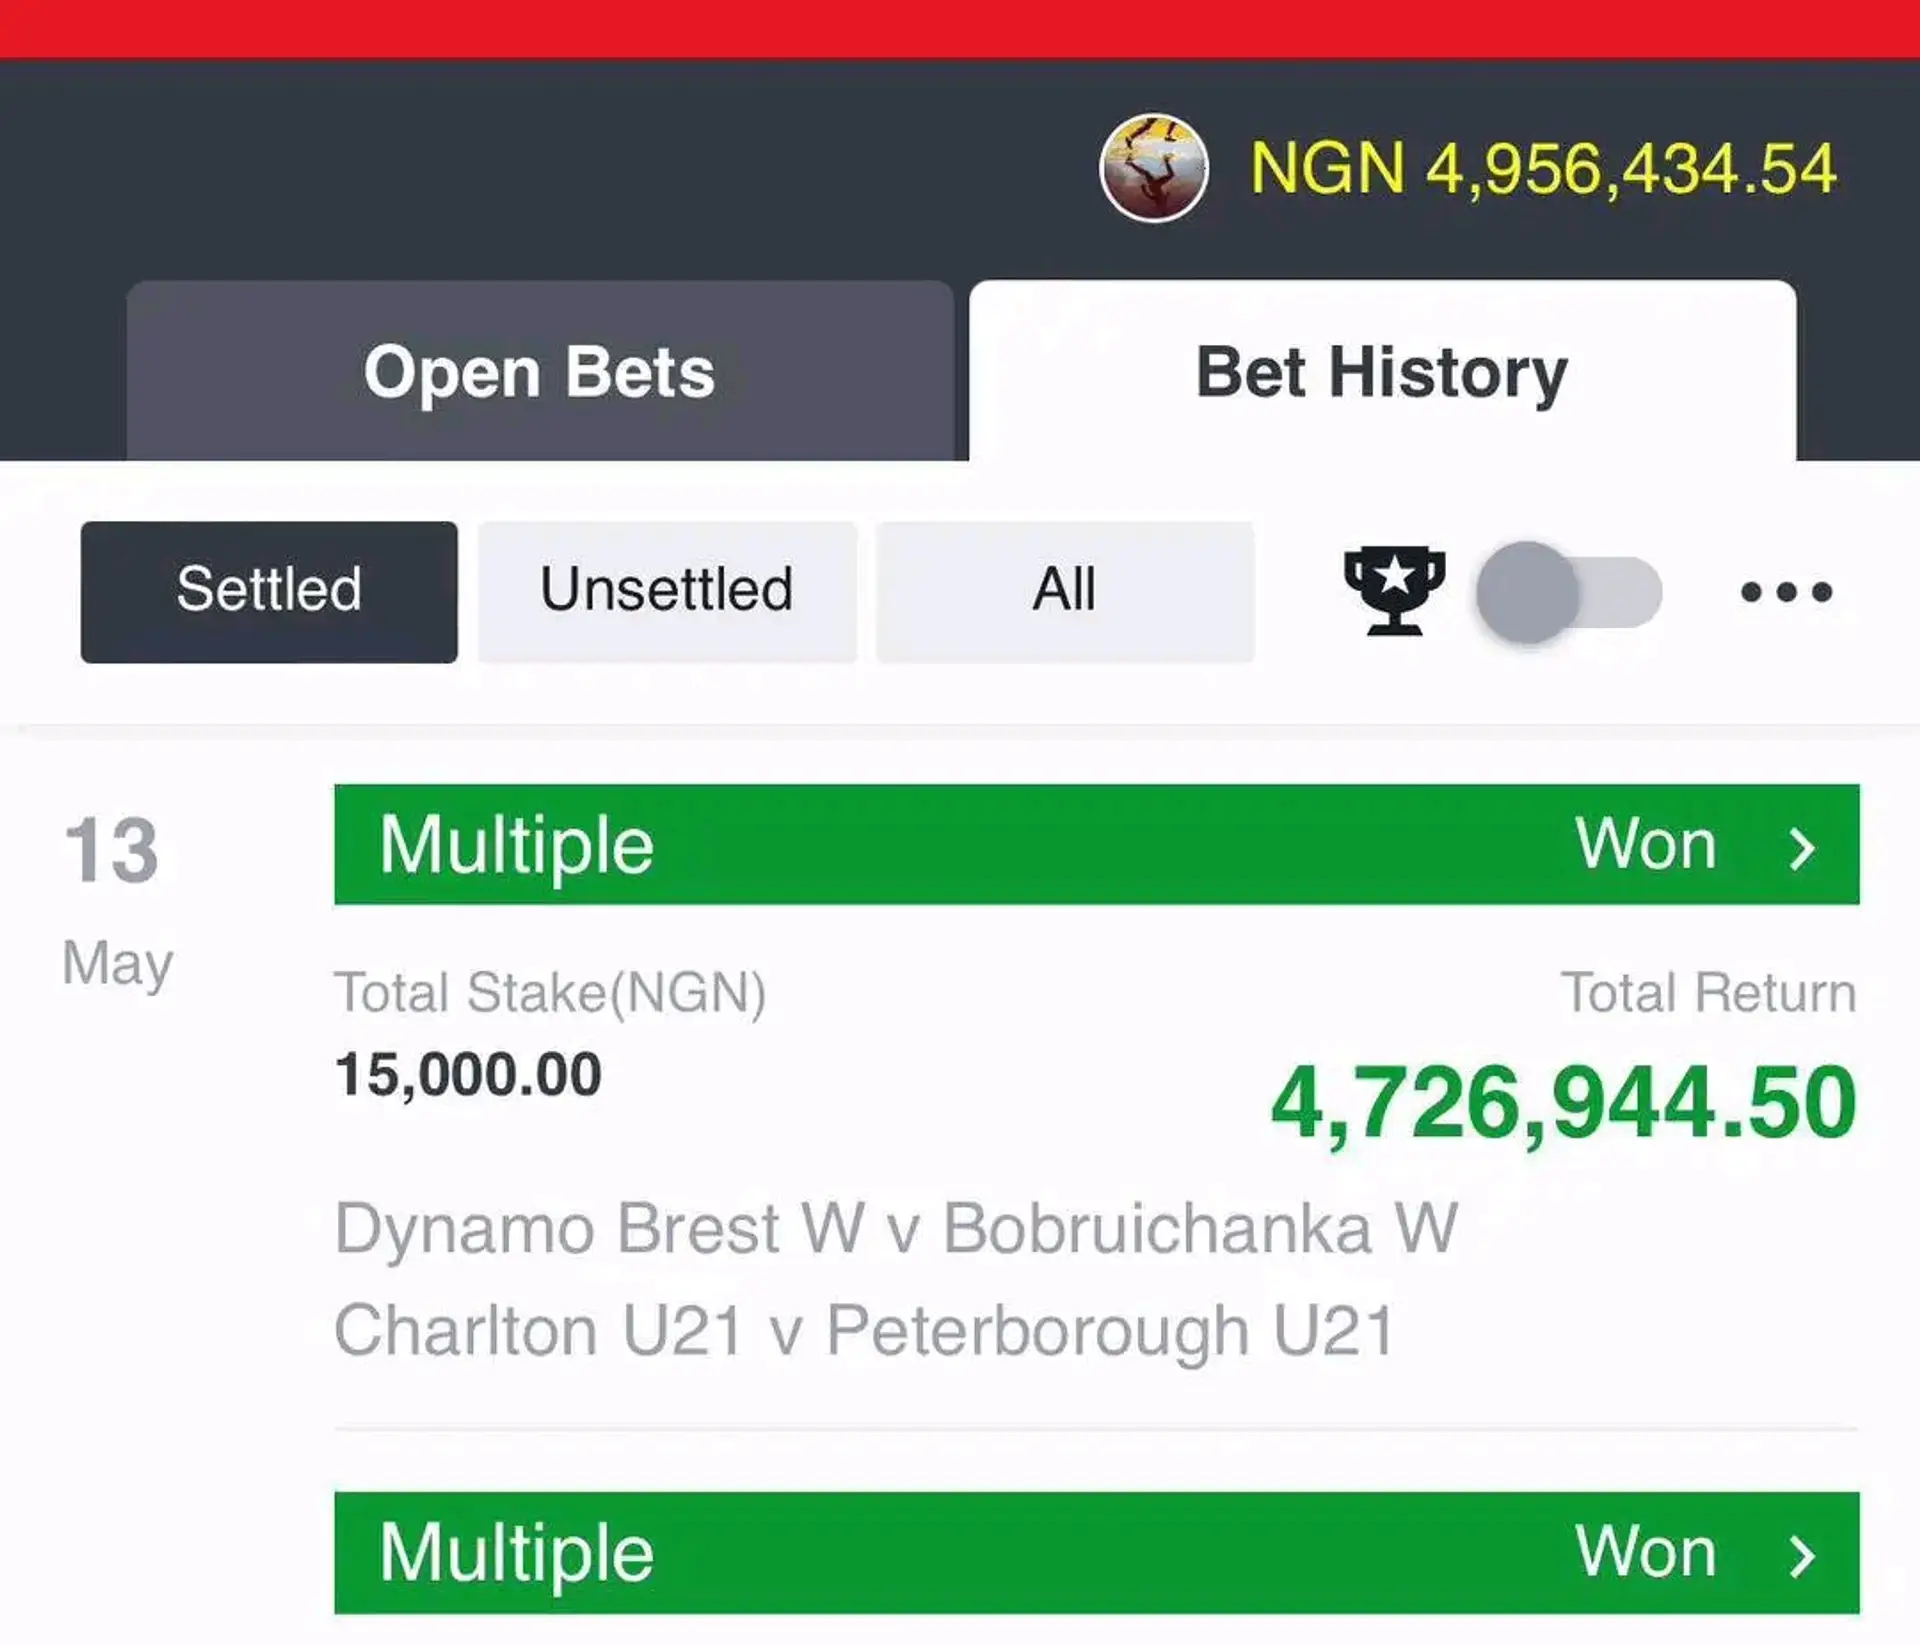 Congratulations to my yesterday subscribers WhatsApp+2348133676846 today subscribe for todays odd WINNING is guaranteed 